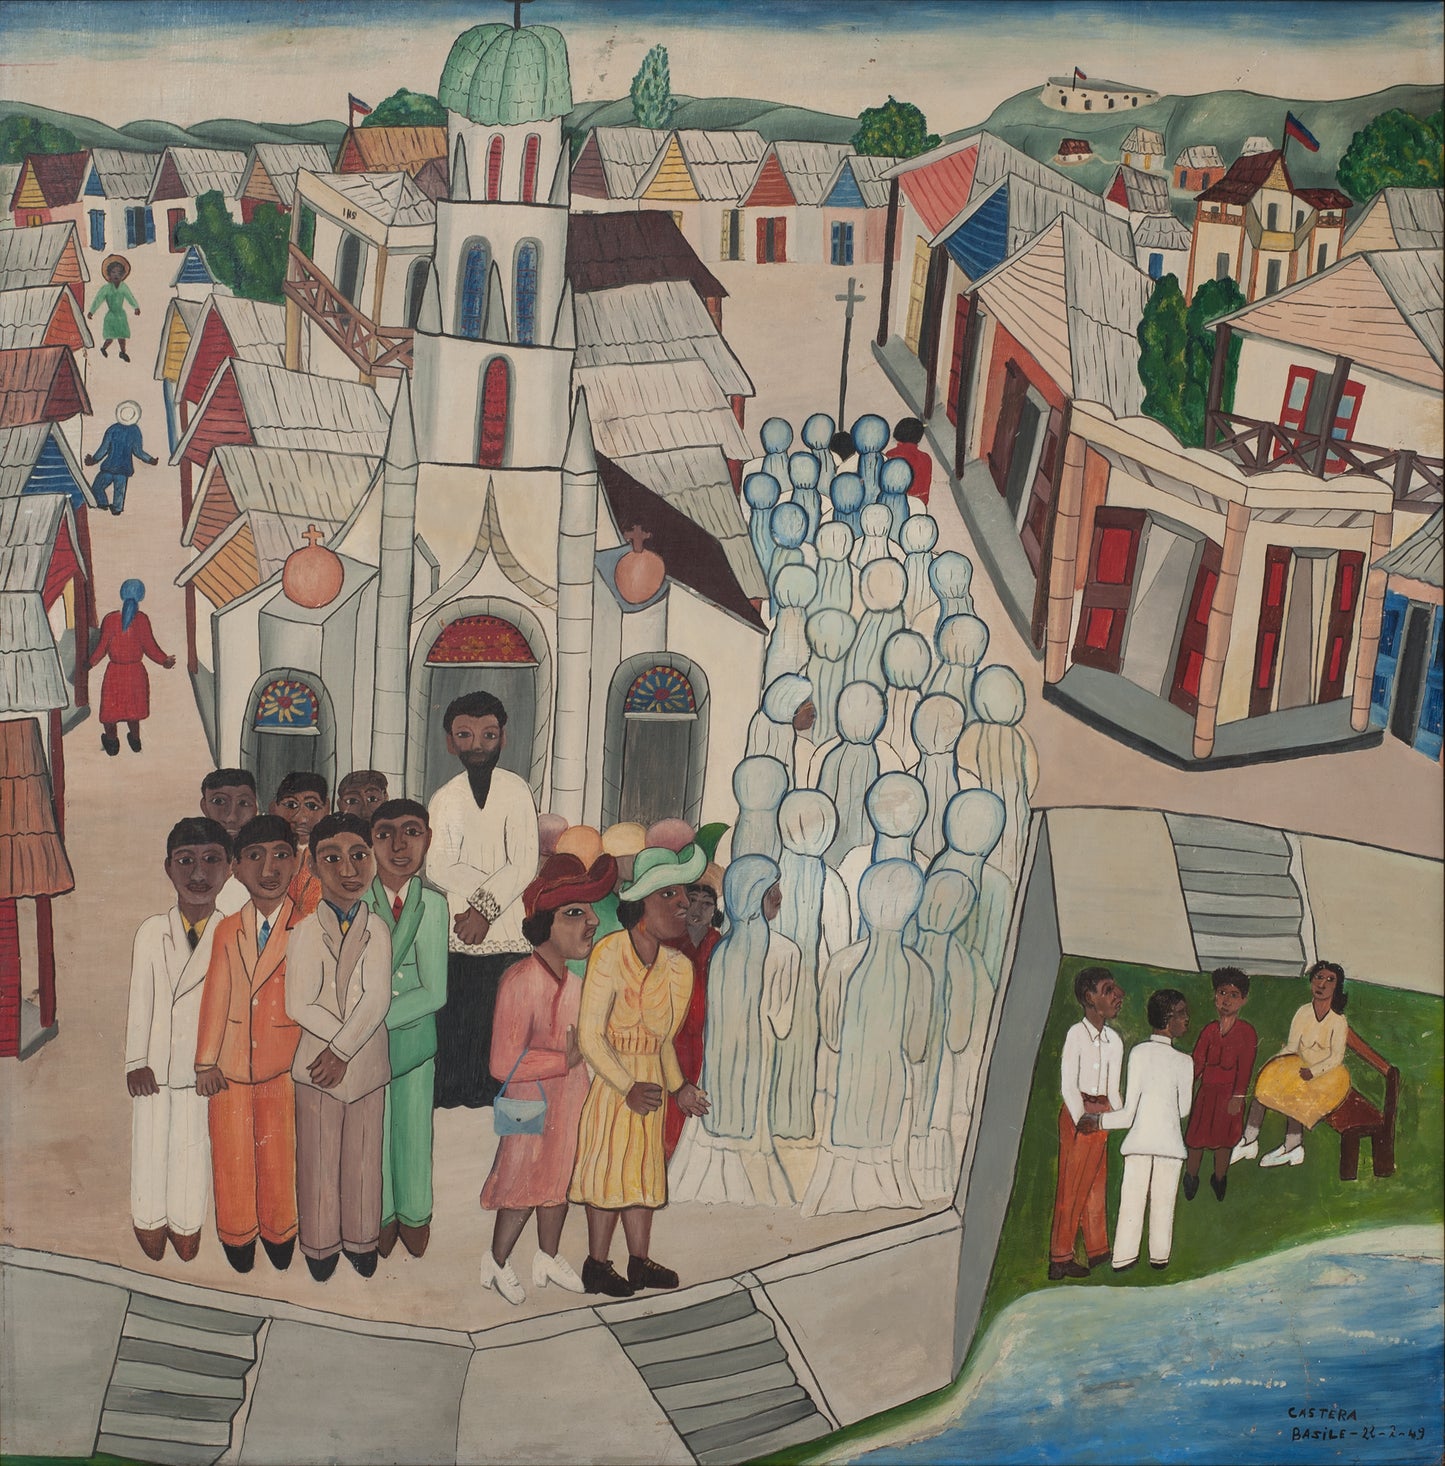 Castera Bazile (1923-1966) 24.50"x24" The Wedding 1949 Oil on Masonite #3-3-96GSN-HA - Fondation Marie & Georges S. Nader